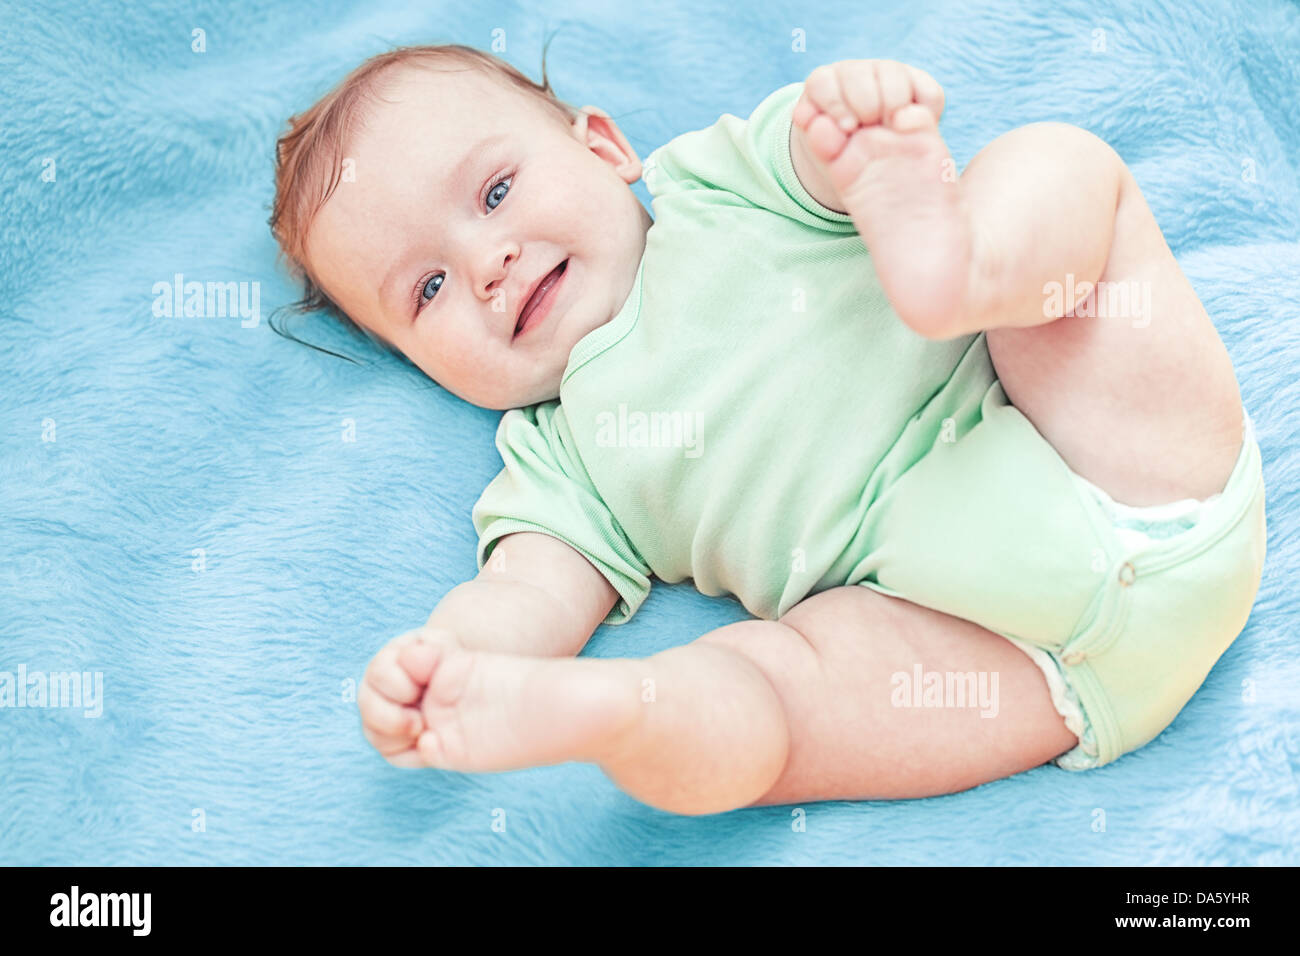 Cute smiling baby lying on a blue blanket after having a bath. Stock Photo